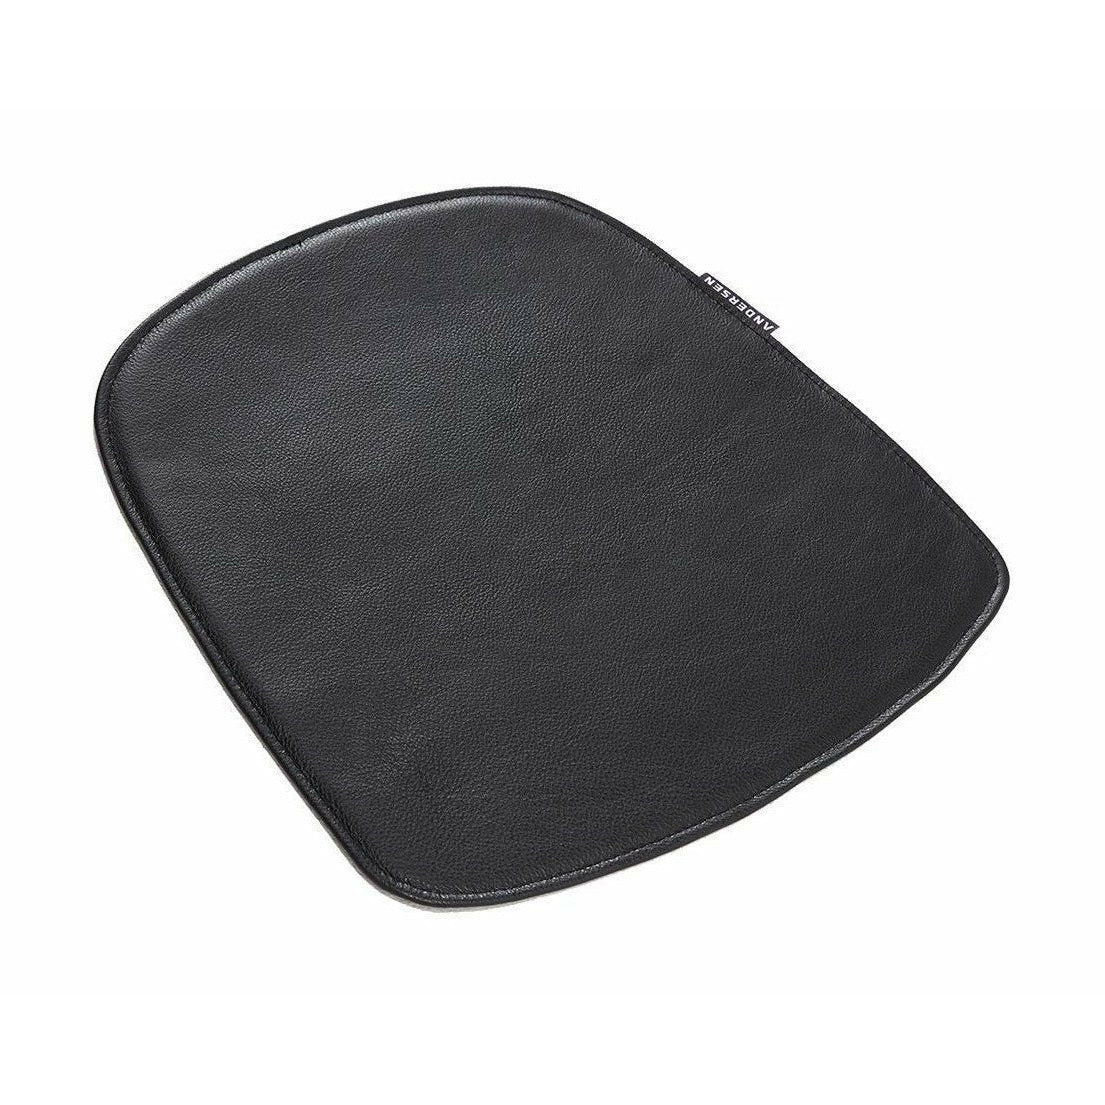 Andersen Furniture Seat Cover For Ac3 Chair, Black Leather